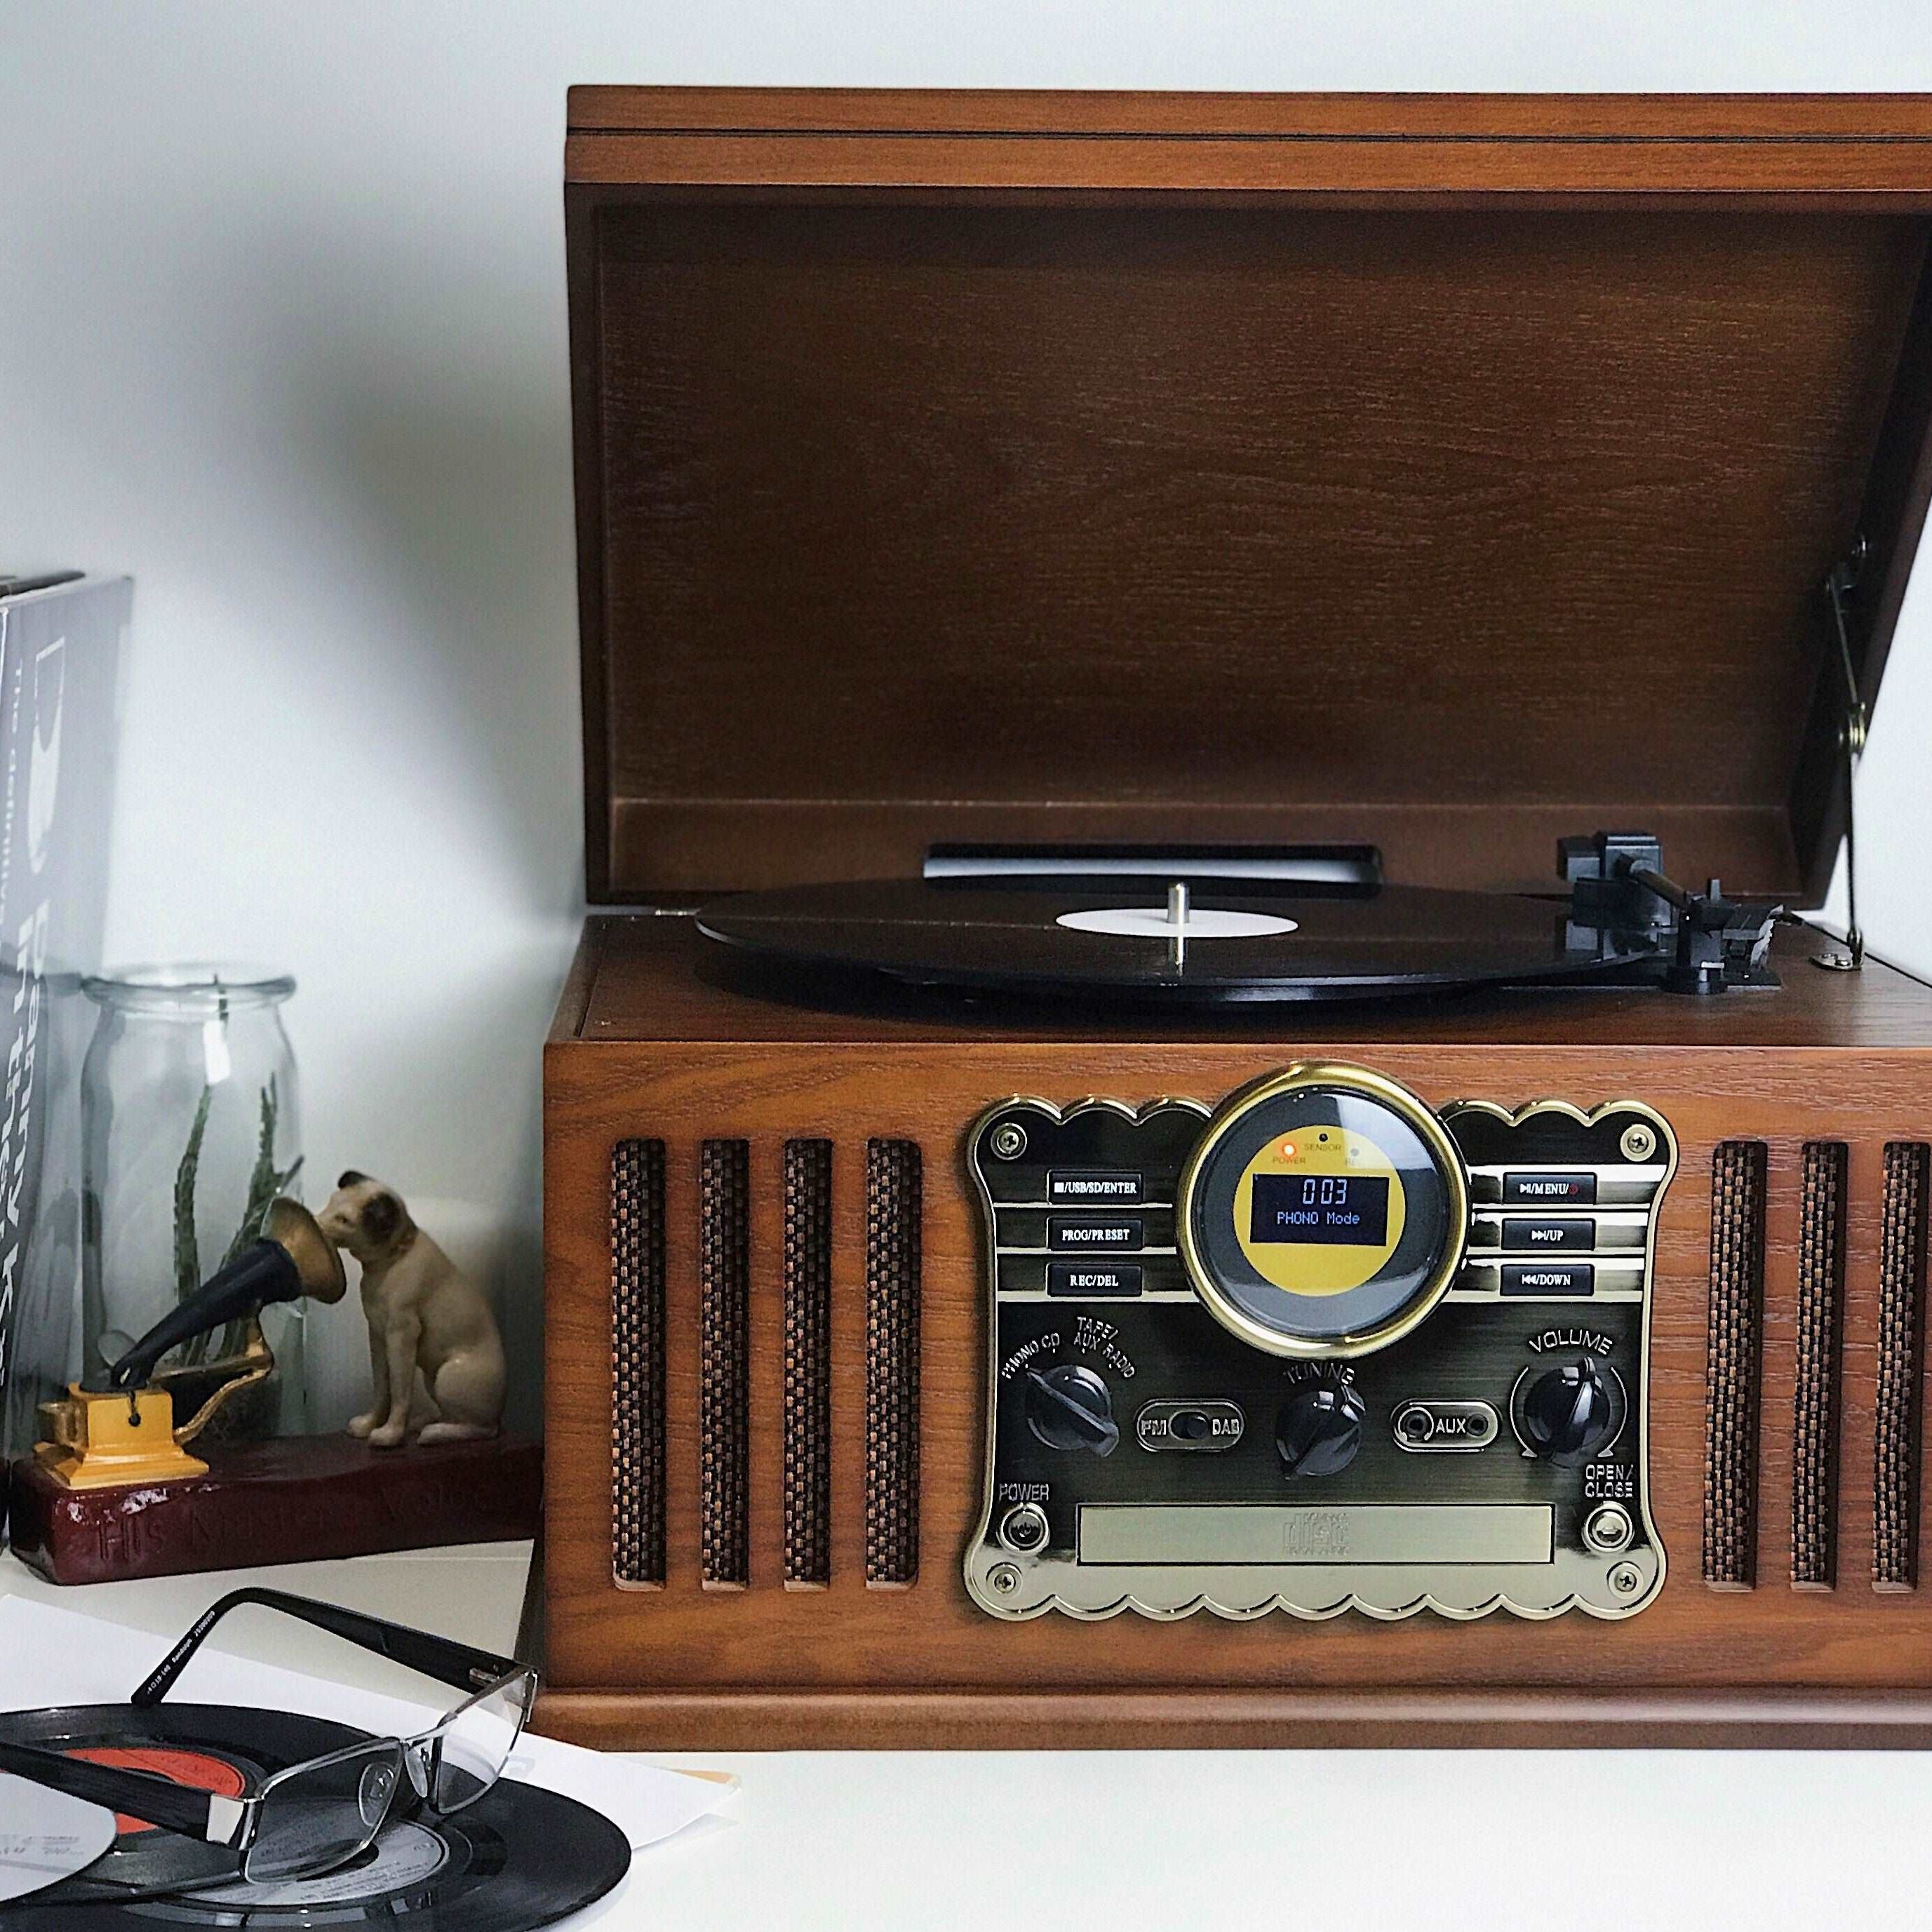 WESTMINSTER Nostalgia 3-Speed Record Player comes with DAB+ and FM Radio, CD Player, Bluetooh, AUX-IN, Cassette Player & USB/SD MP3 Encoding/Playback